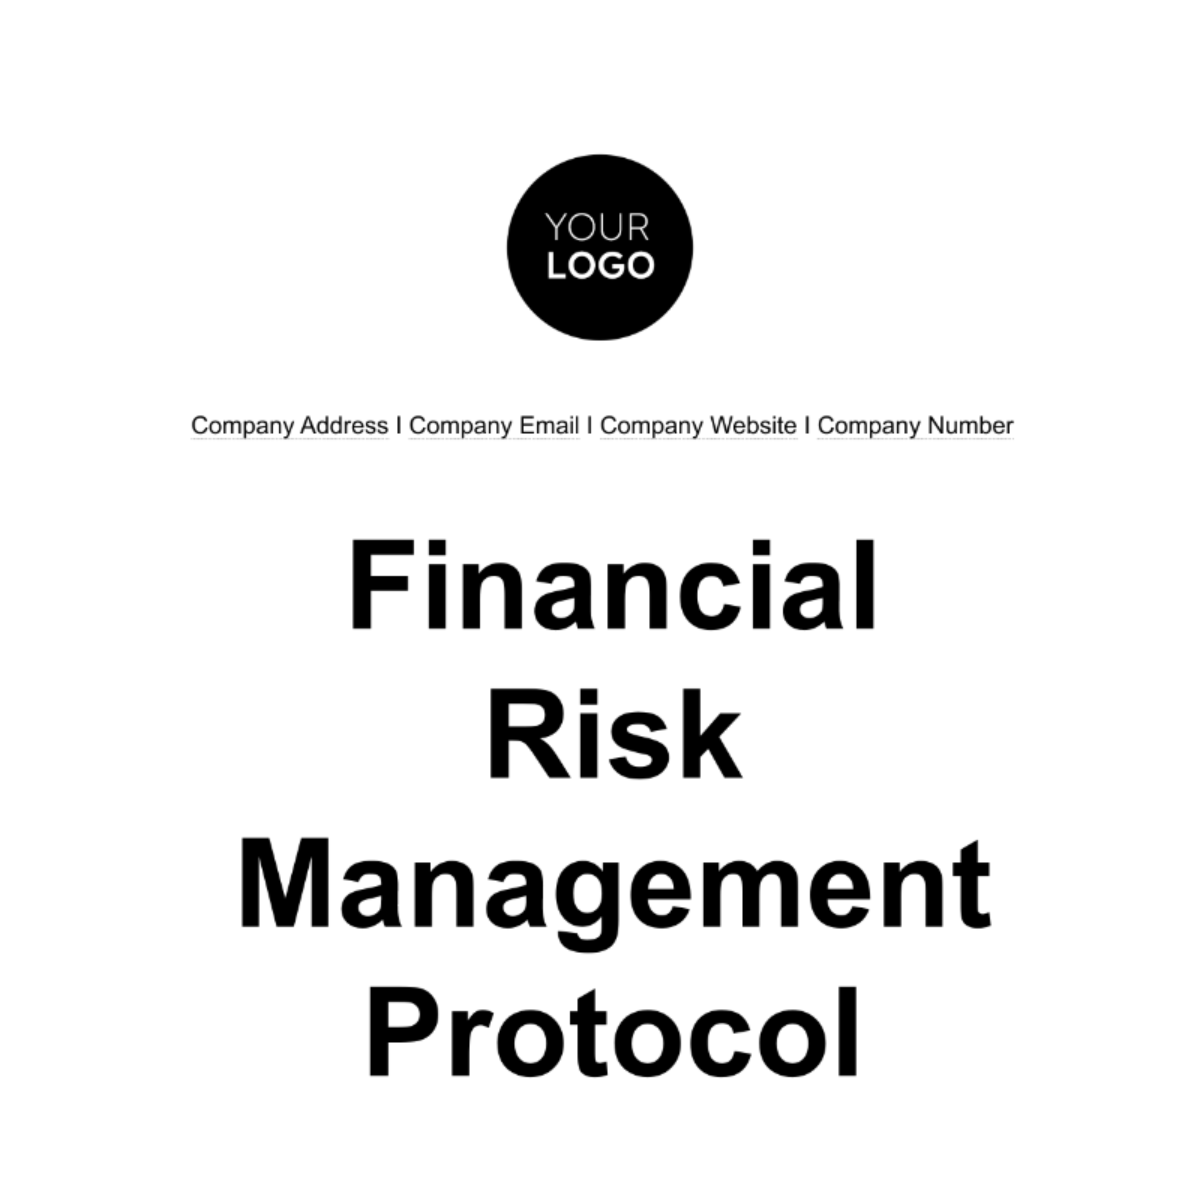 Financial Risk Management Protocol Template